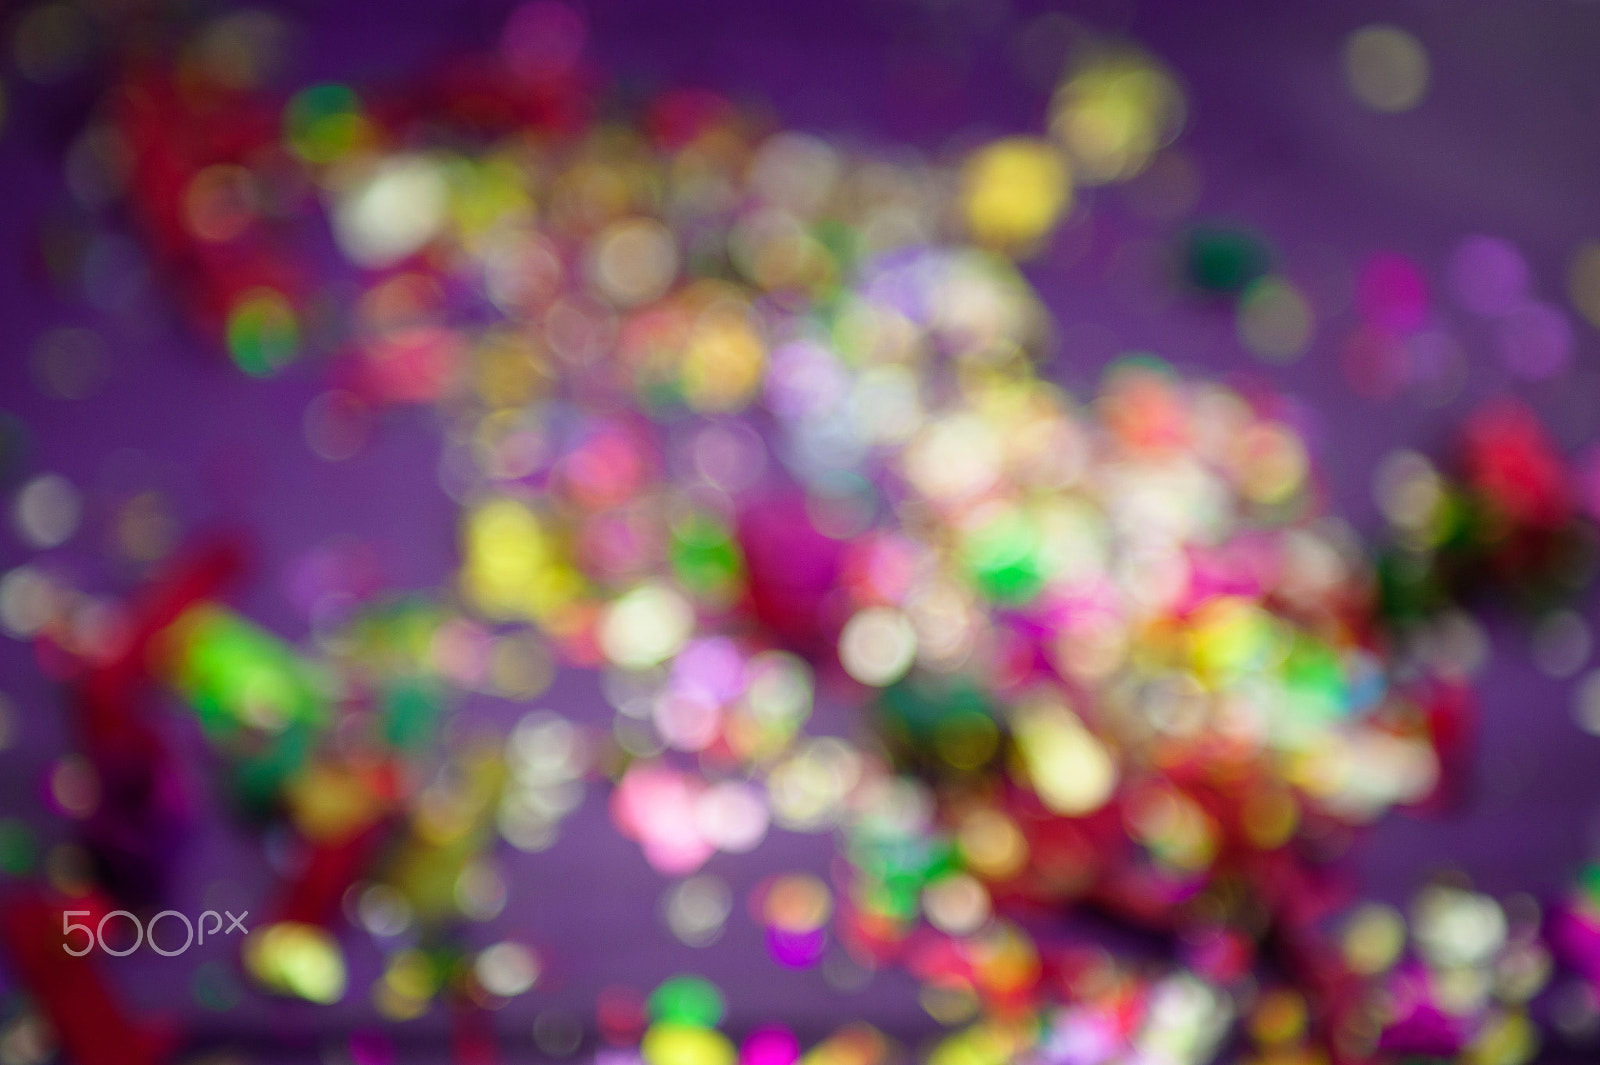 Nikon D700 sample photo. Concept of holiday. background is out of focus. colored confetti photography